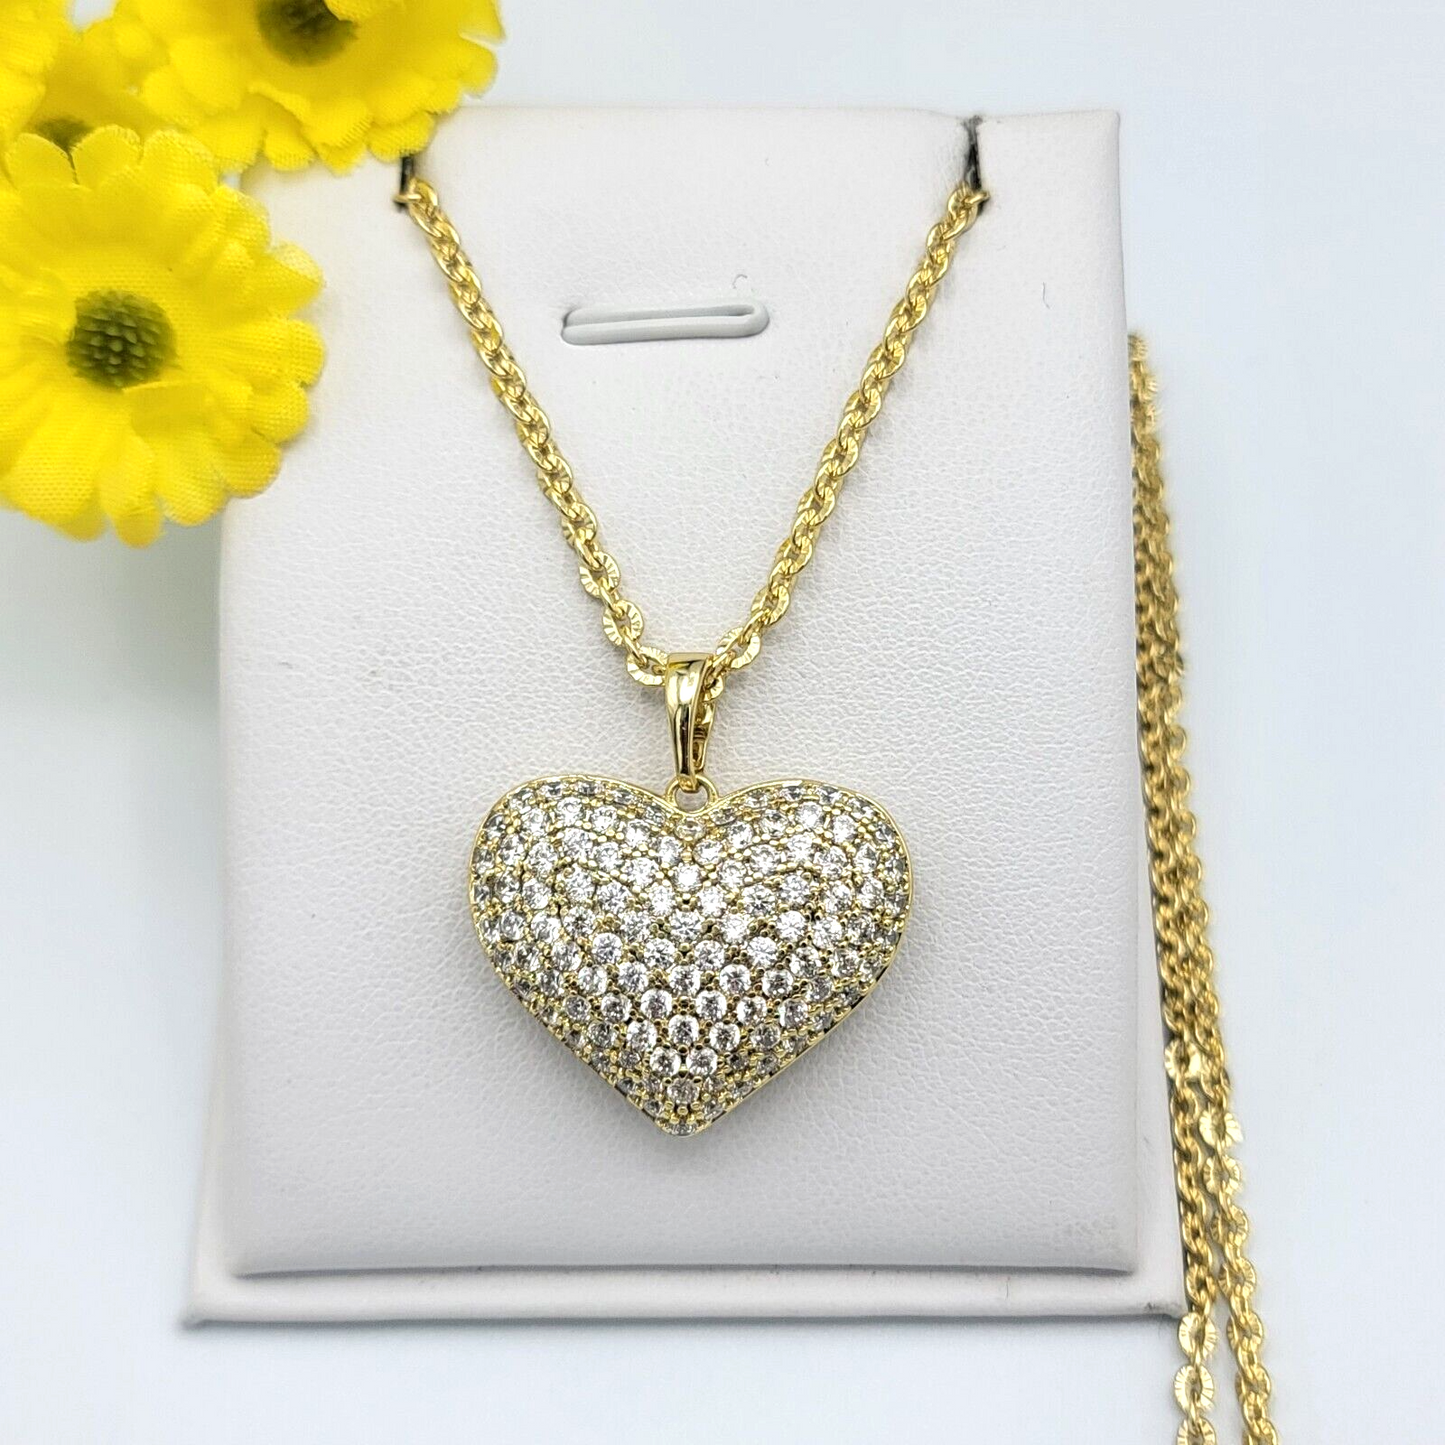 Necklaces - 14K Gold Plated. Crystal Puffed Icy LOVE HEART Pendant & Chain.